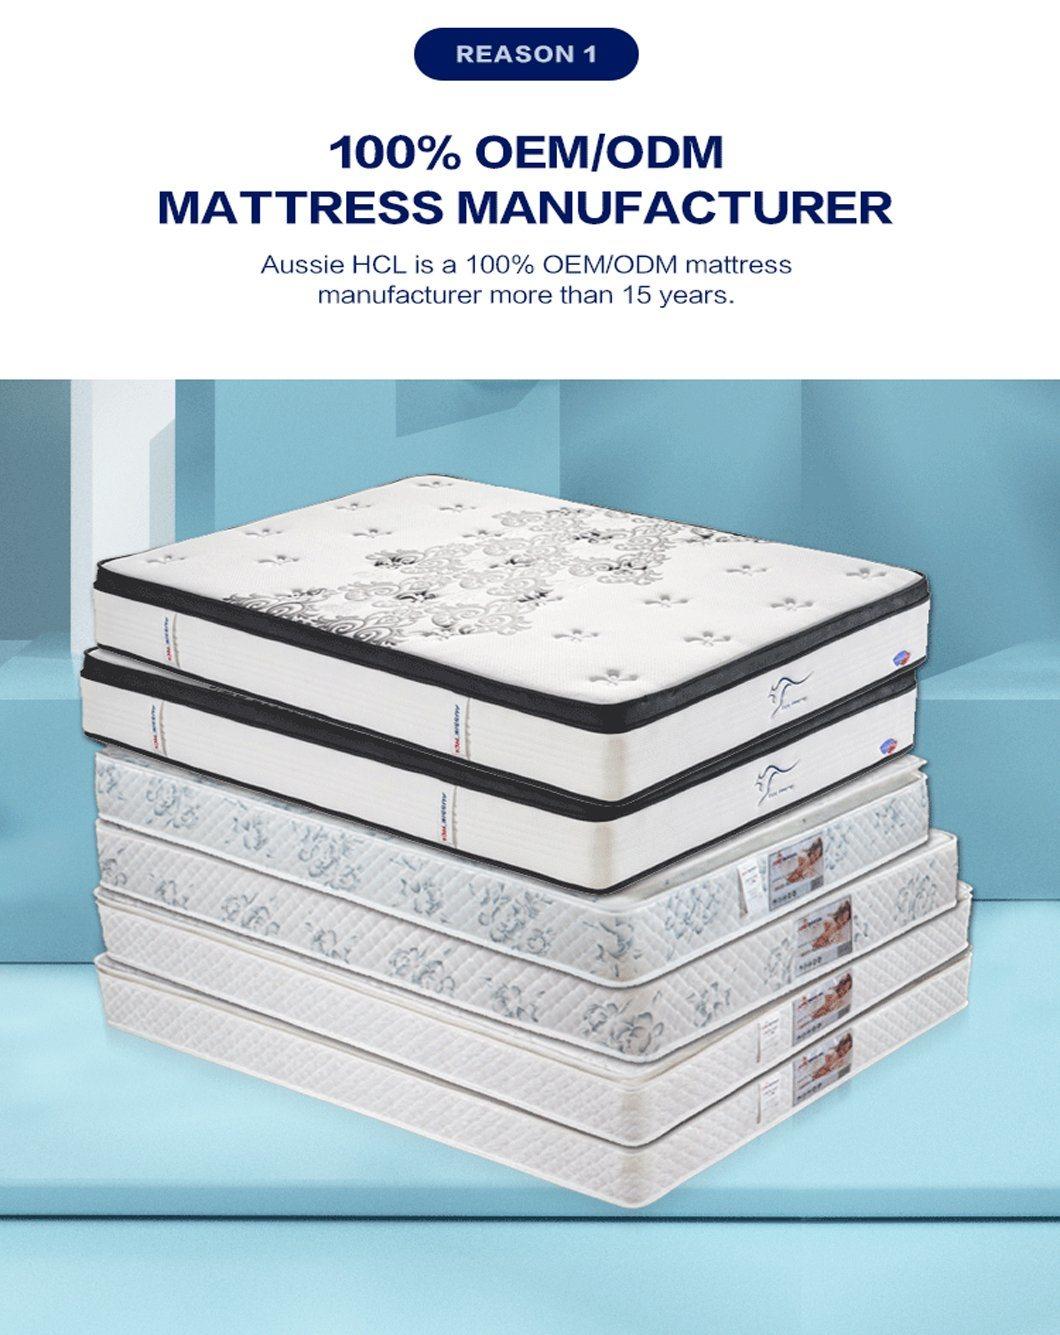 China Factory Wholesale Modern Bed Innerspring Mattresses for Home Furniture in a Box Queen King Full Size Spring Latex Gel Memory Foam Mattress